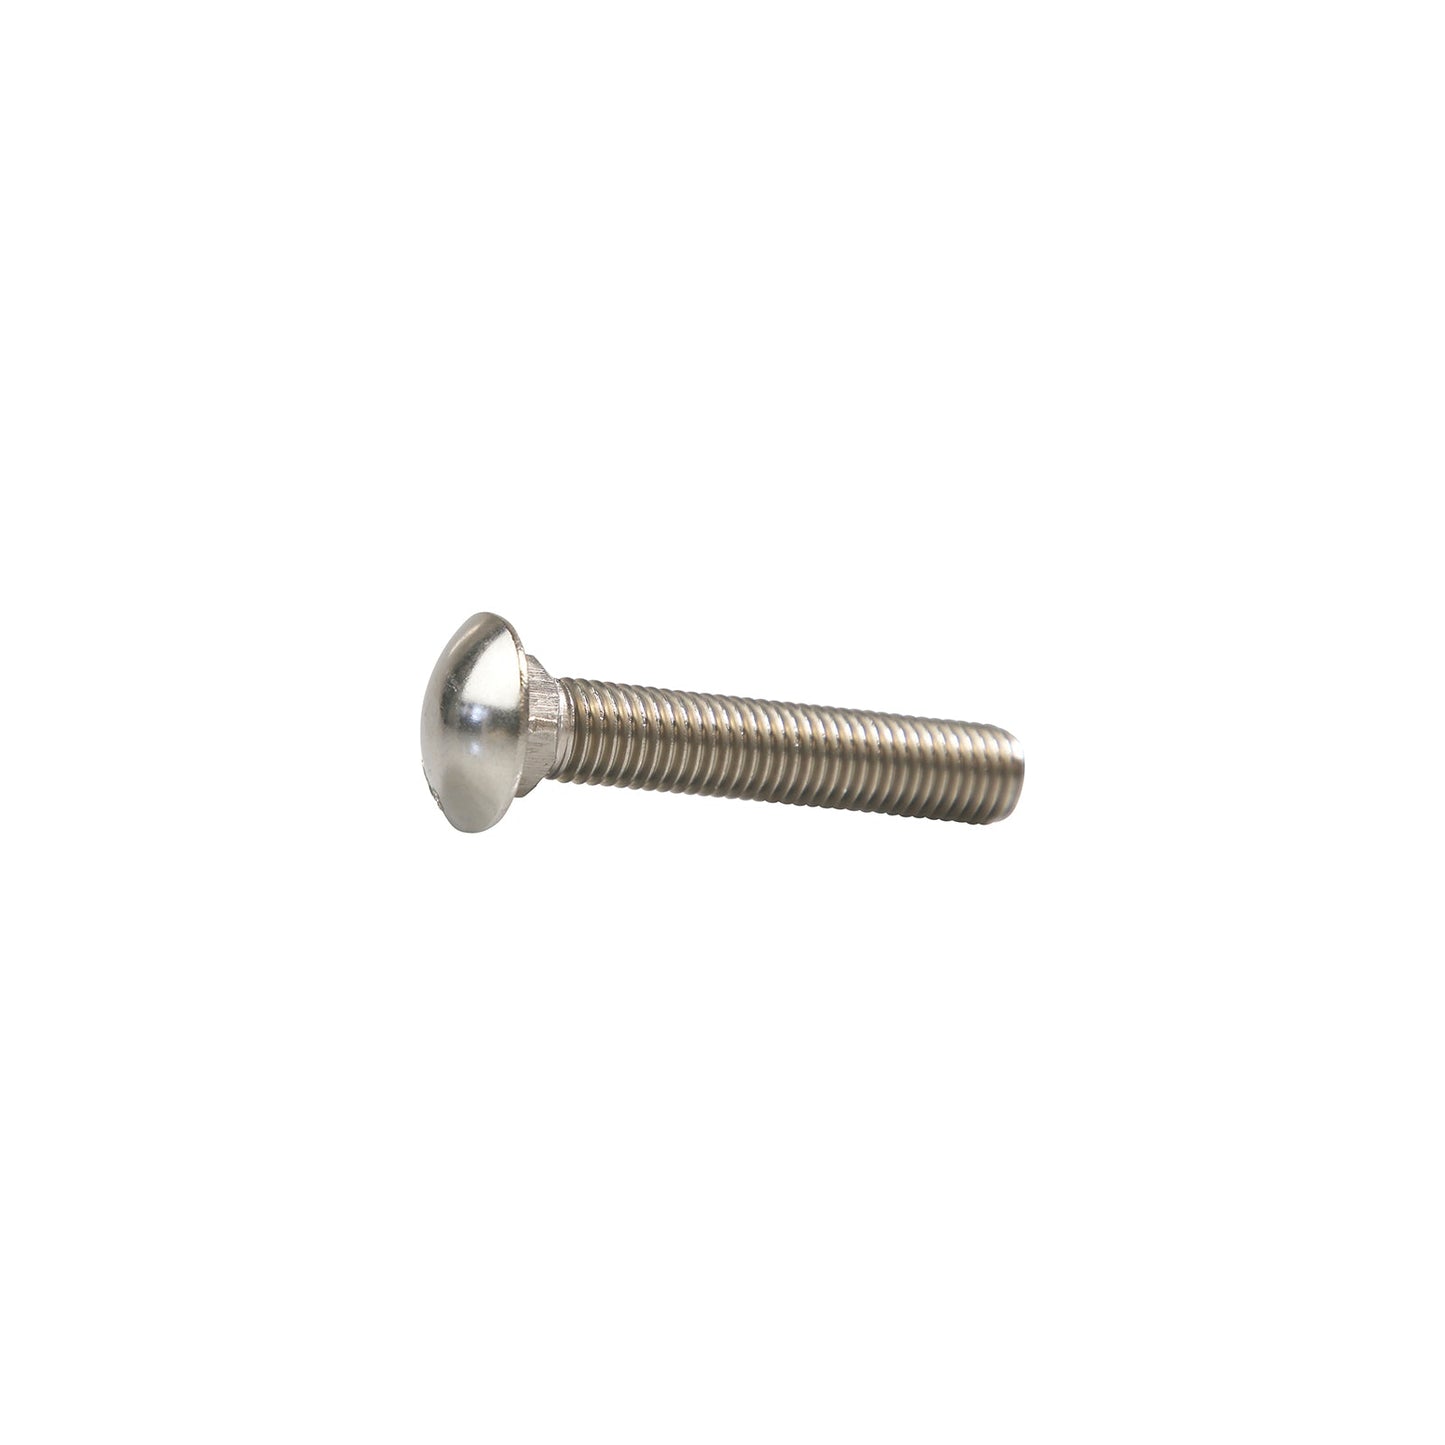 5/8"-11 x 3-1/2" Conquest Carriage Bolt - 316 Stainless Steel